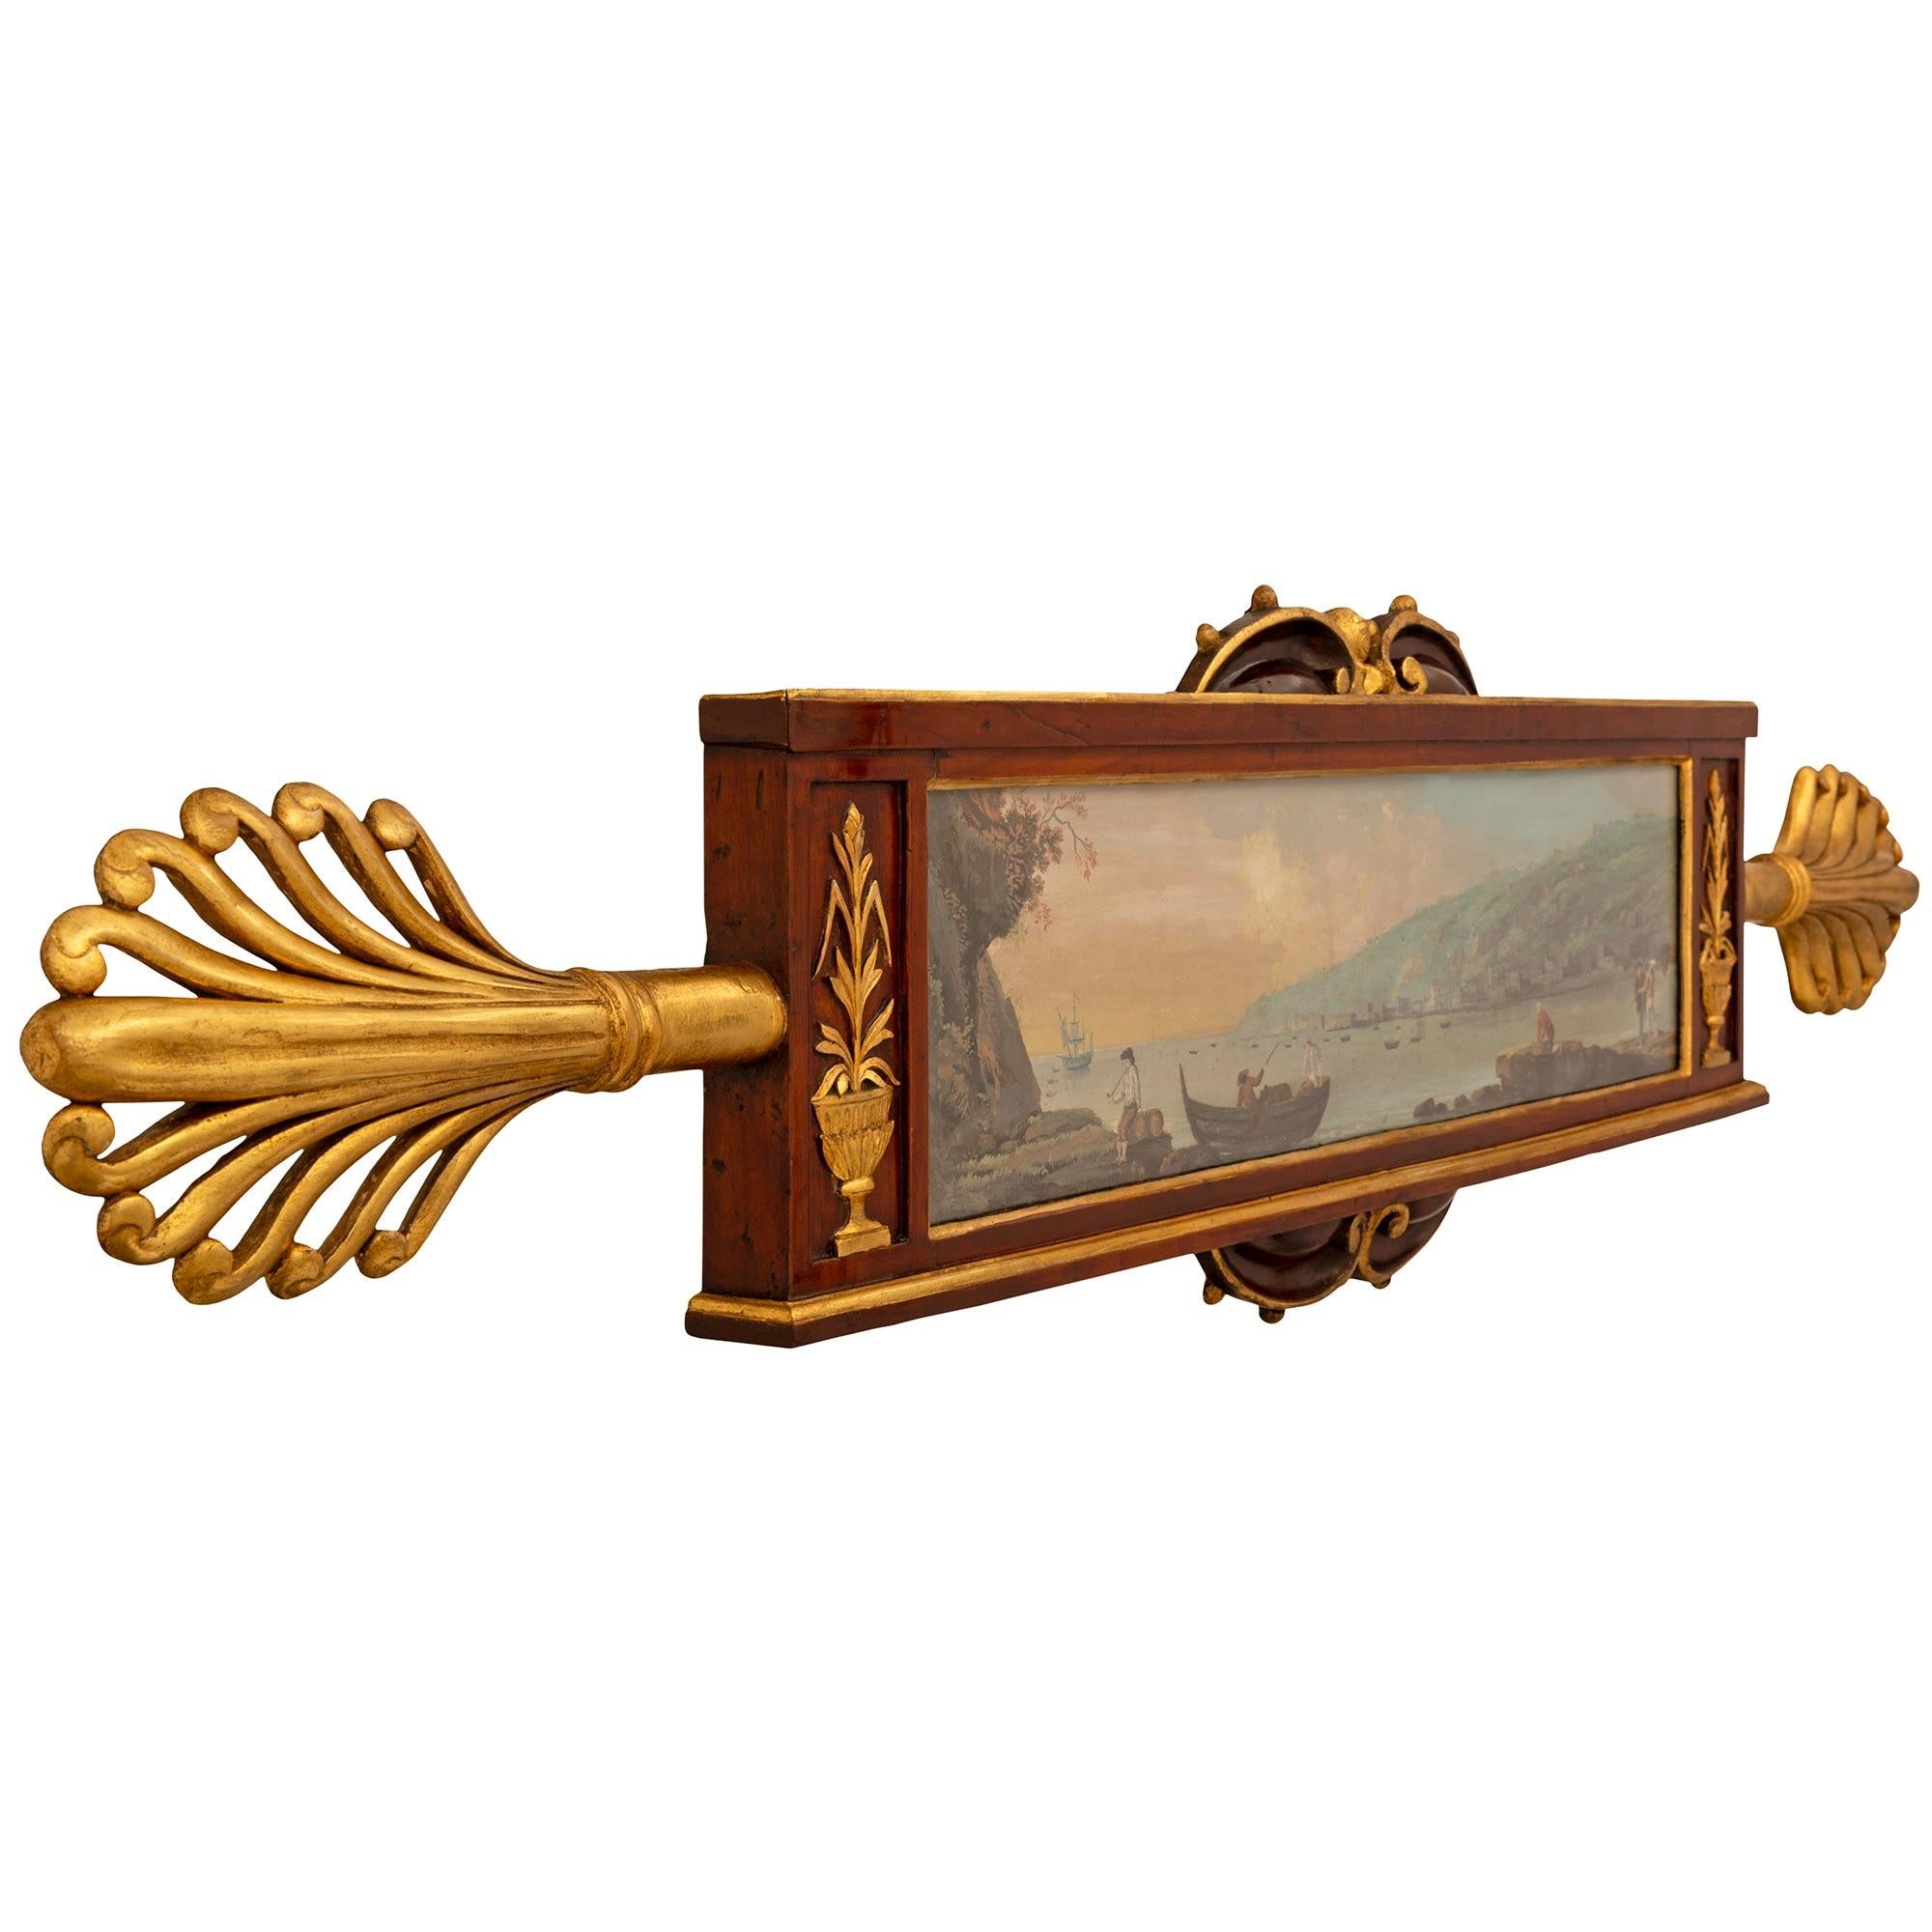 A unique and most decorative pair of Italian early 19th century Neapolitan Neo-Classical st. gouaches in Walnut and Giltwood frames. Each colorful gouache is of a landscape fishing scene with various male and female figures conversing and enjoying